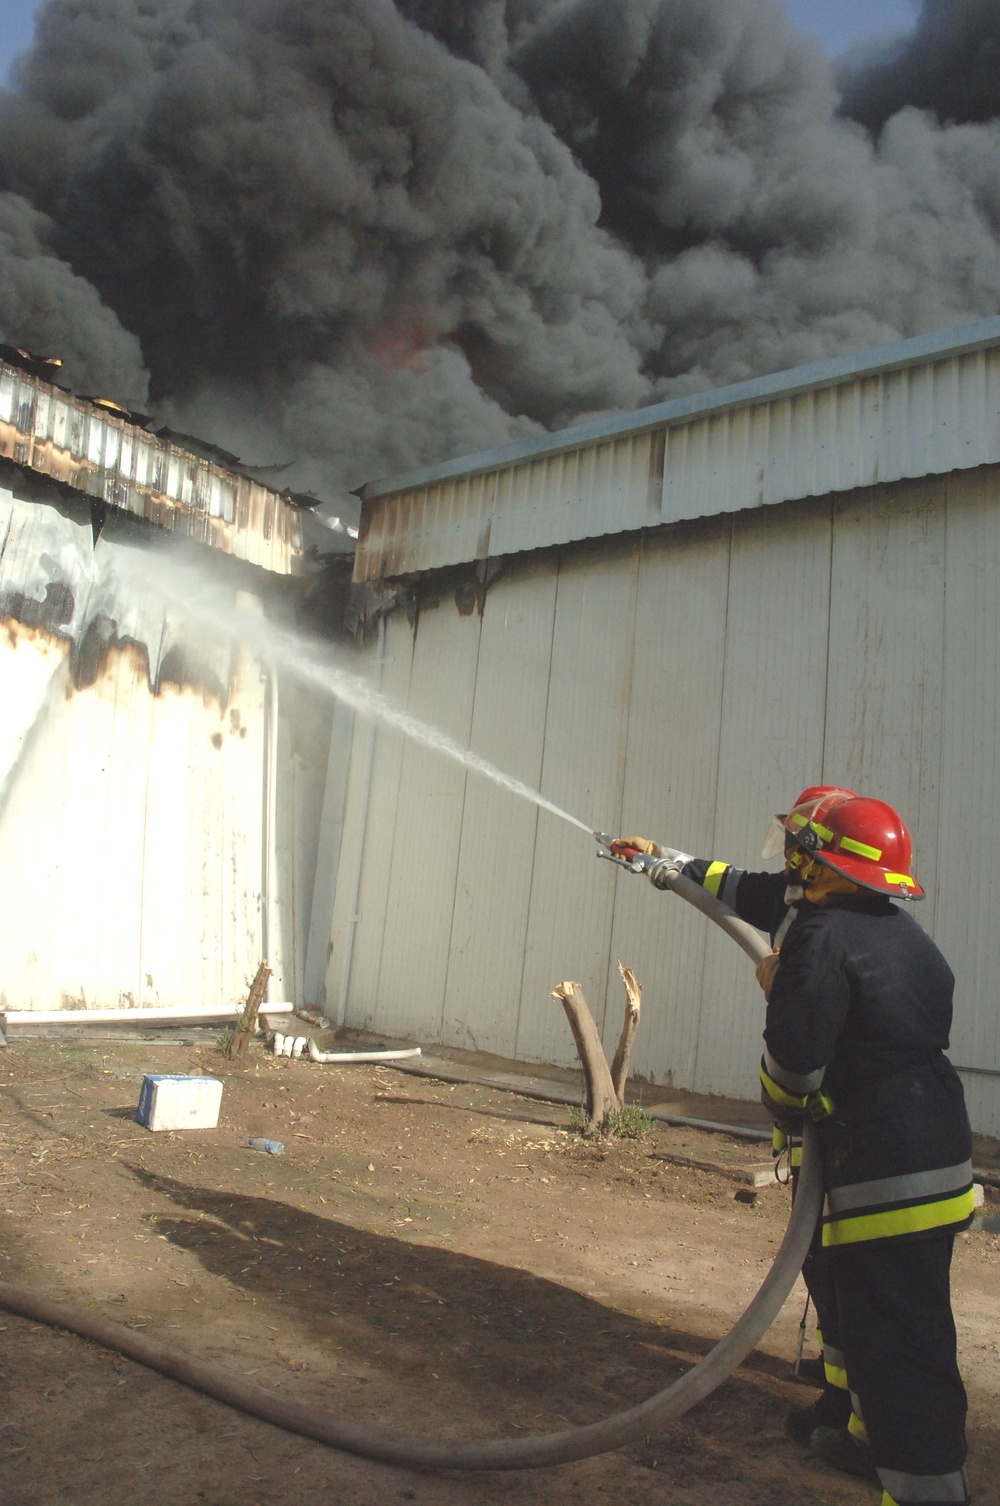 Iraqi, American firefighters battle blaze at weapons training si